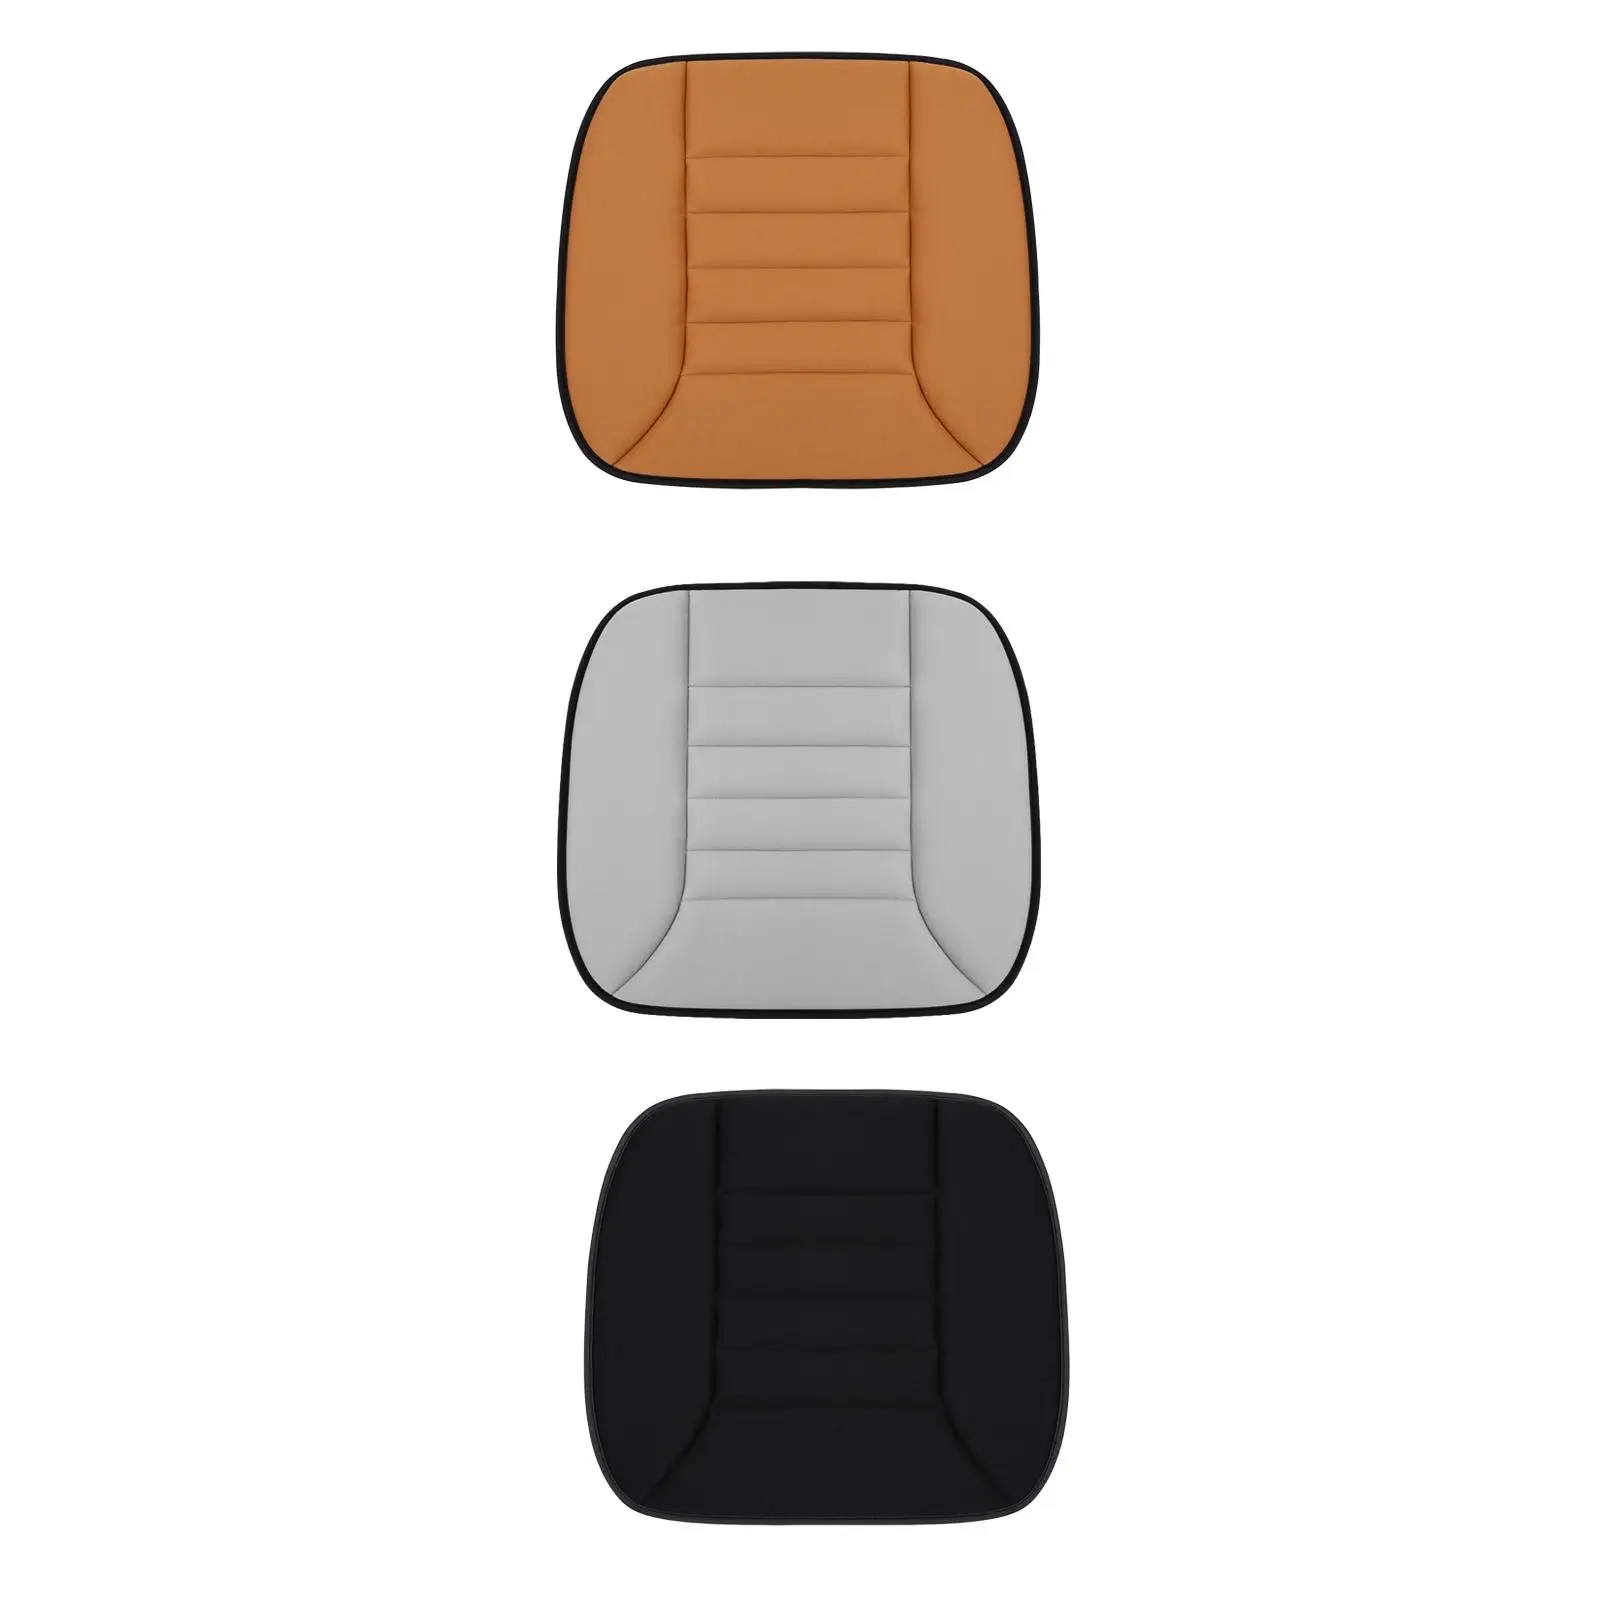 Car Seat Cushion Direct Replaces Stylish Equipment Spare Anti Slip Auto Seat Cover Mat for Truck SUV Van Vehicles